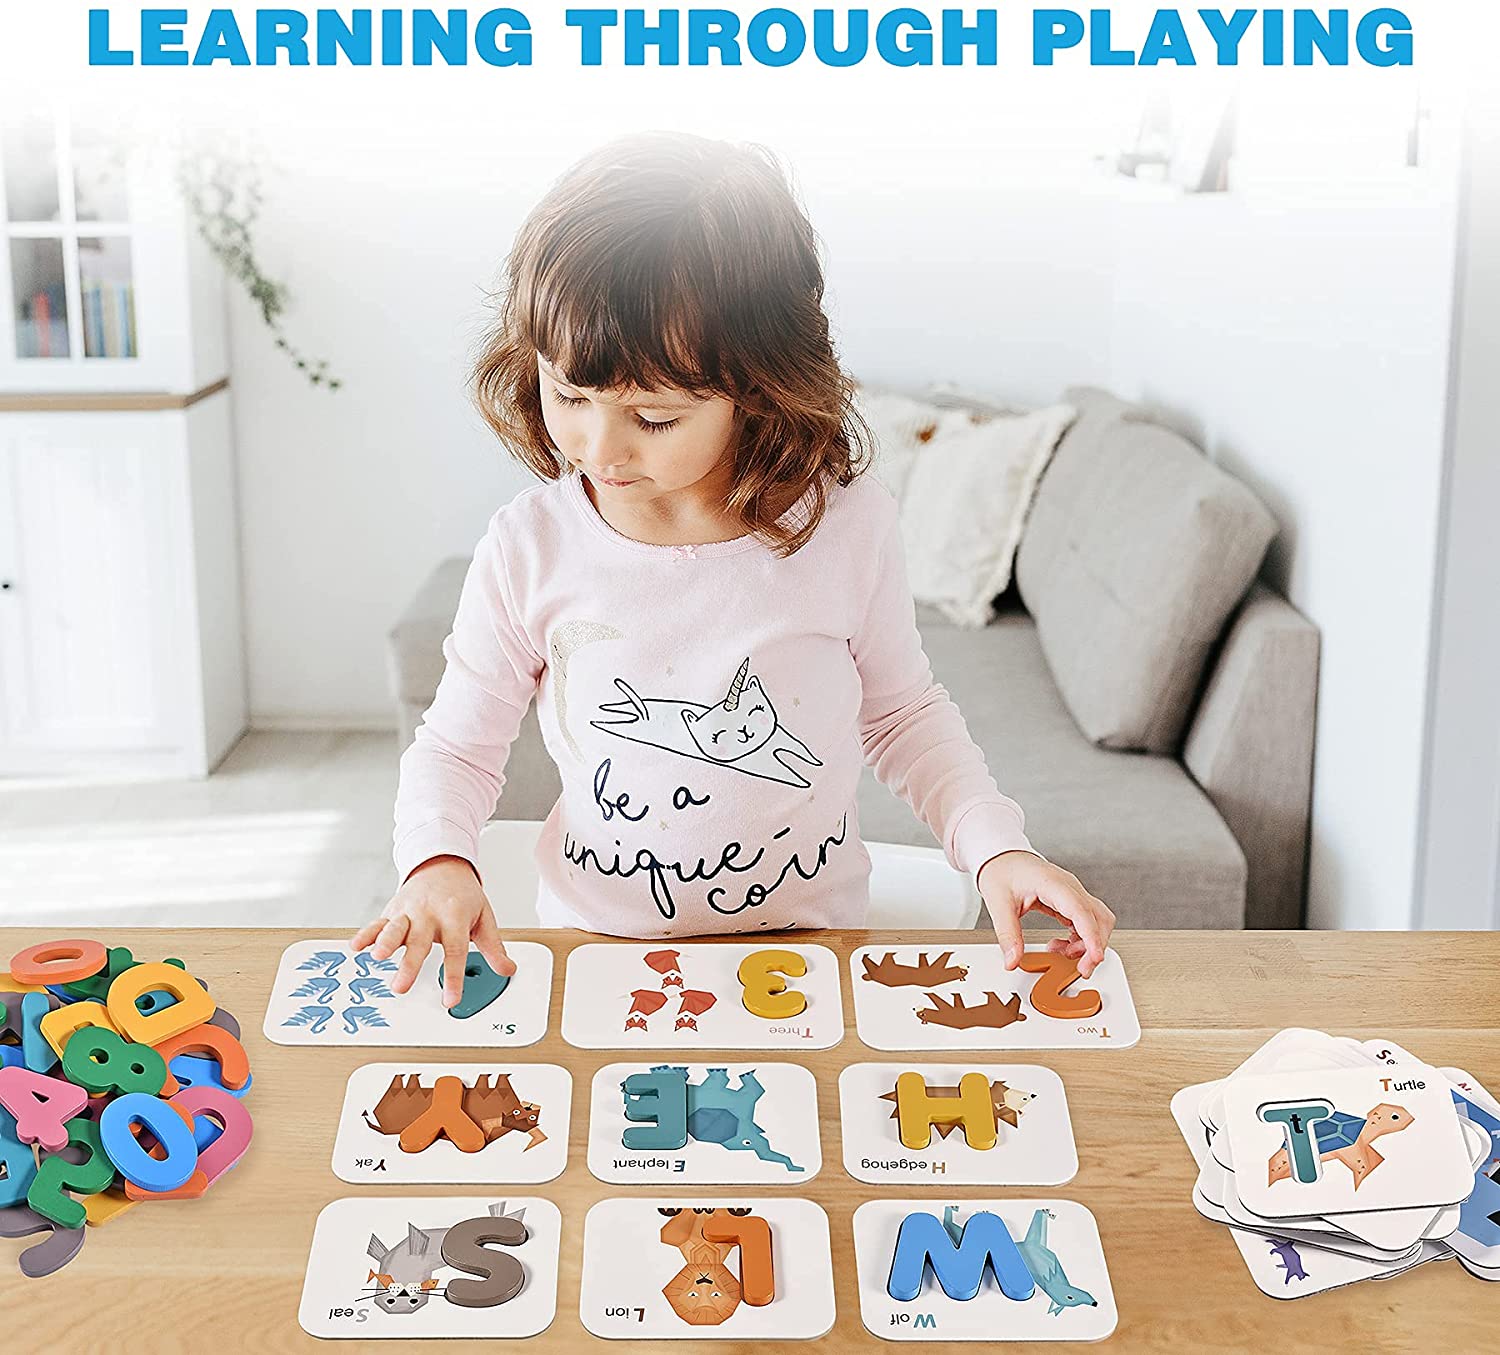 Montessori Learning and Educational Toys Gifts for Kids 3 4 5 Years, Wooden  Reading Blocks Toys, Learning Activities for Preschool Kindergarten